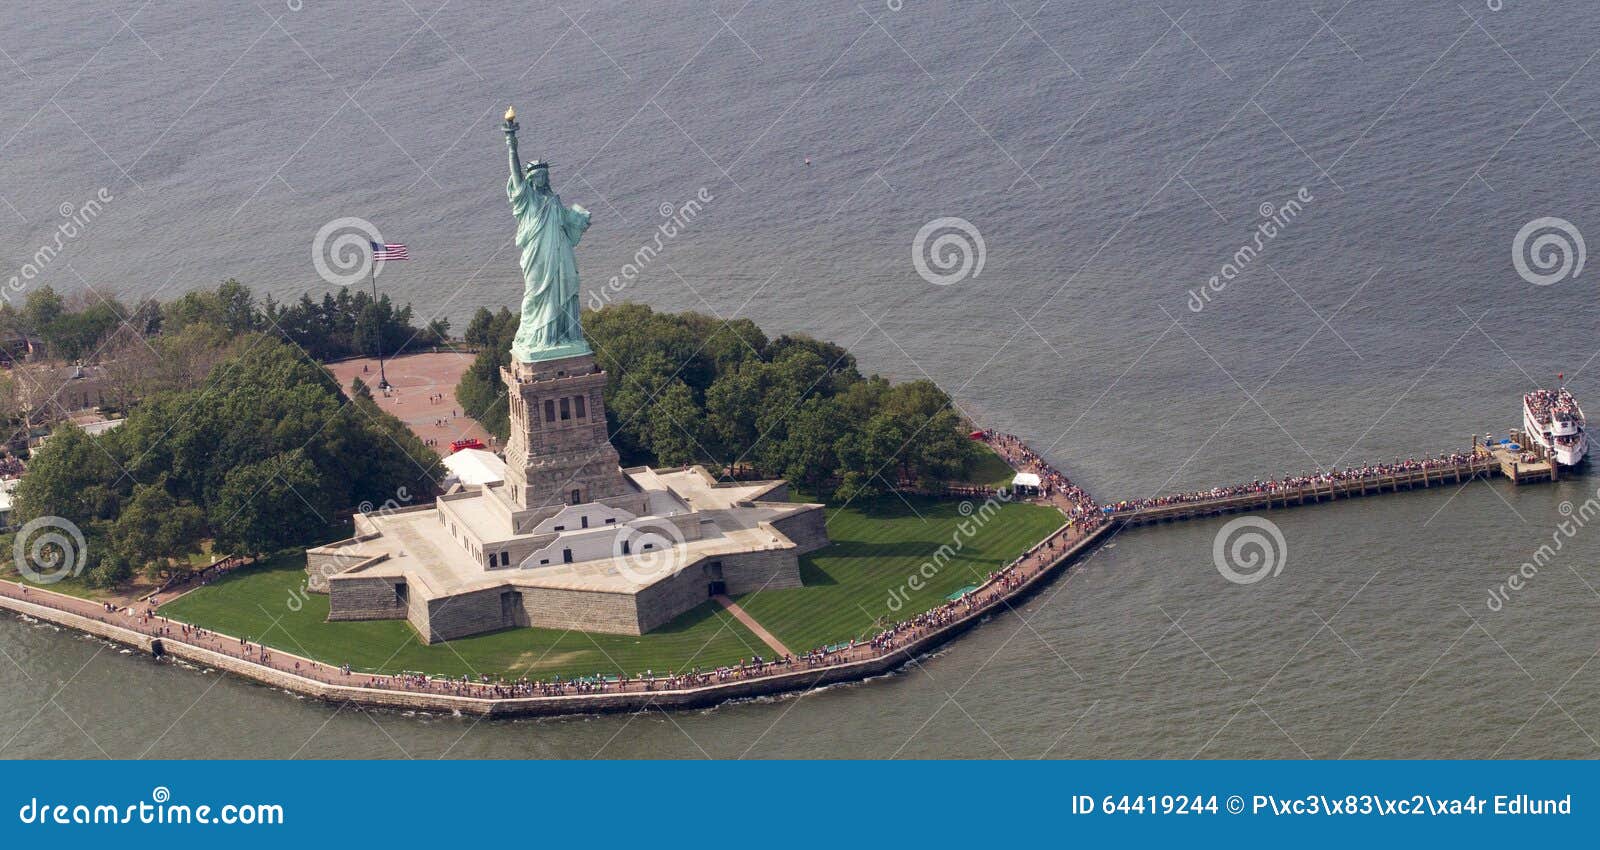 statue of liberty from air.